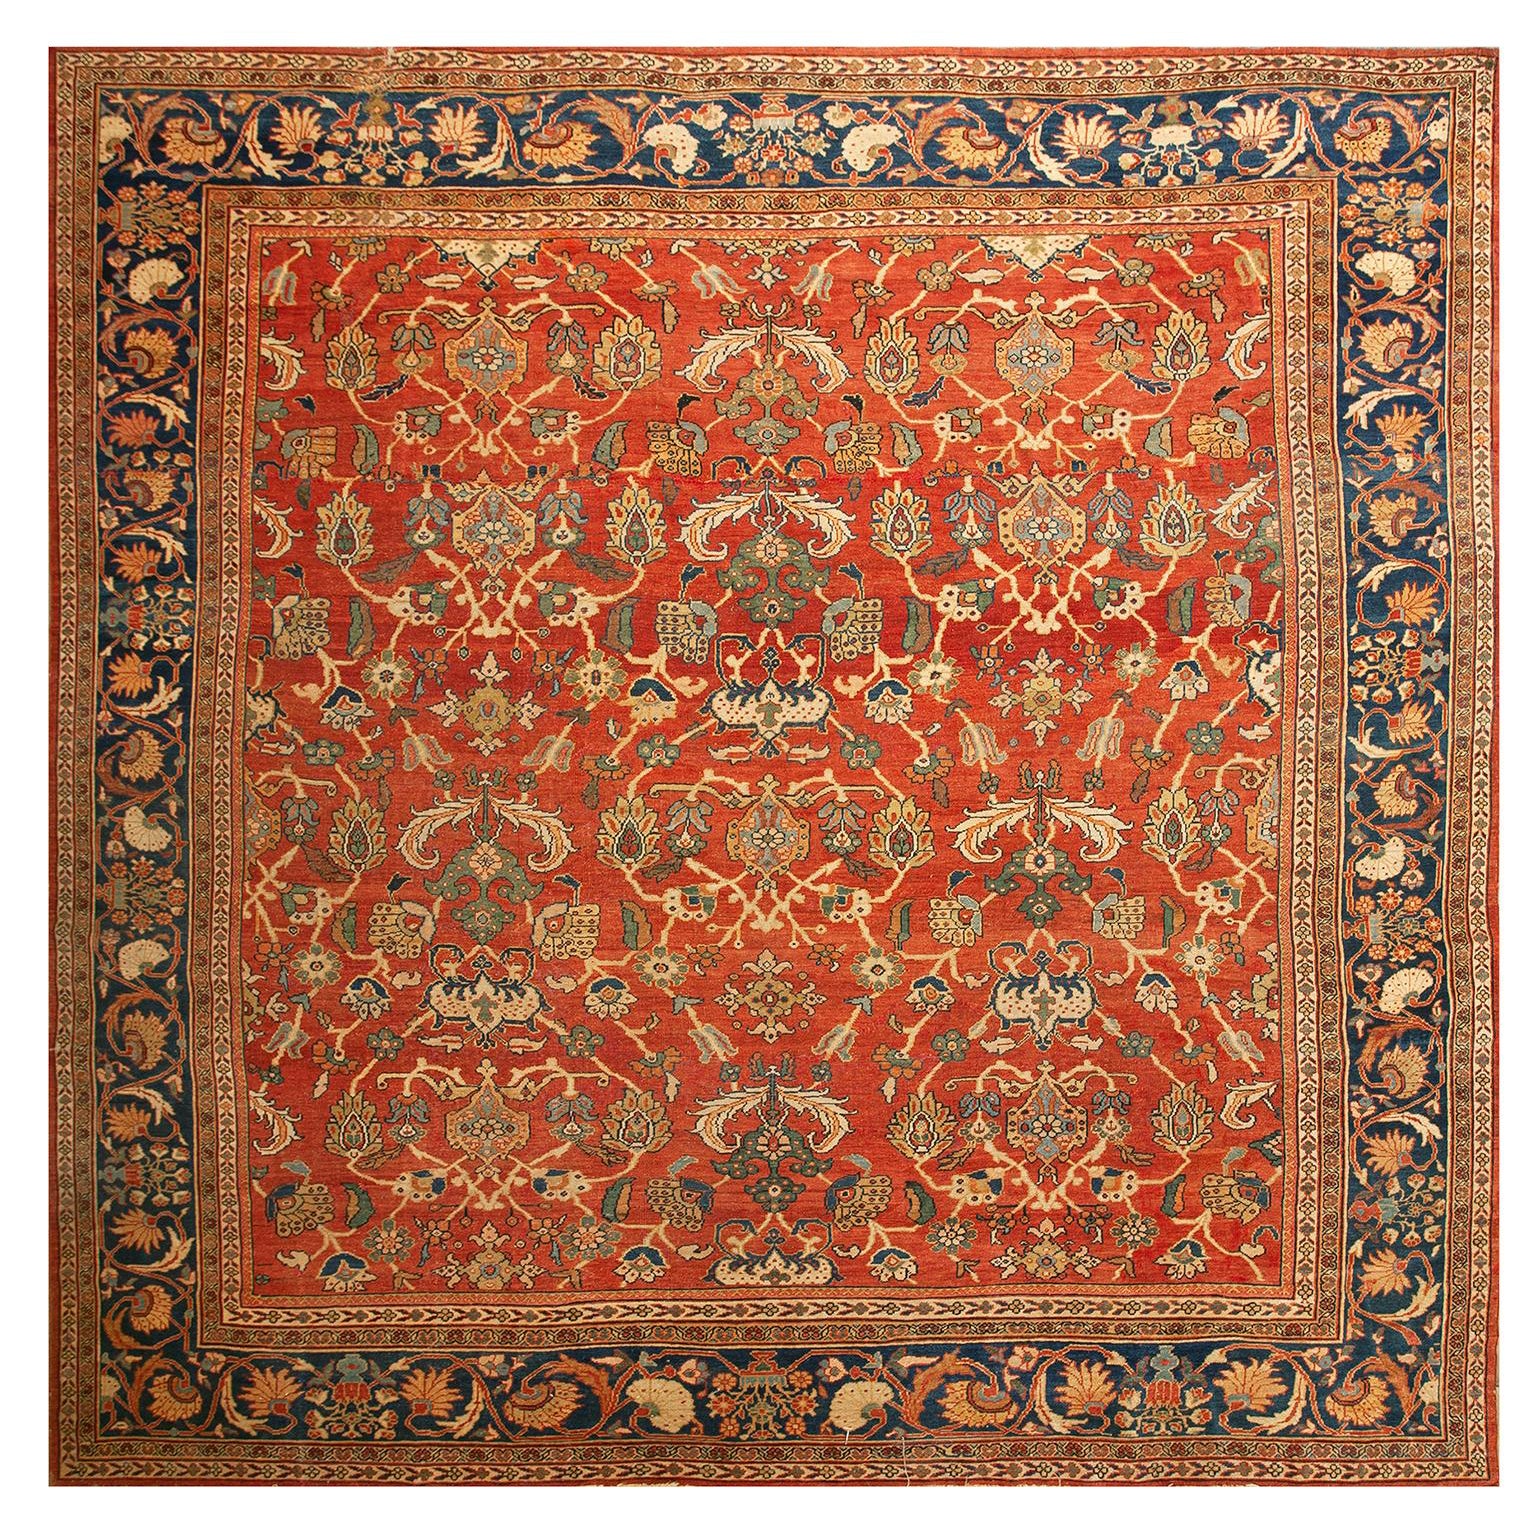 Early 20th Century Persian Sultanabad Carpet ( 11' 6'' x 12' - 350 x 365 ) For Sale